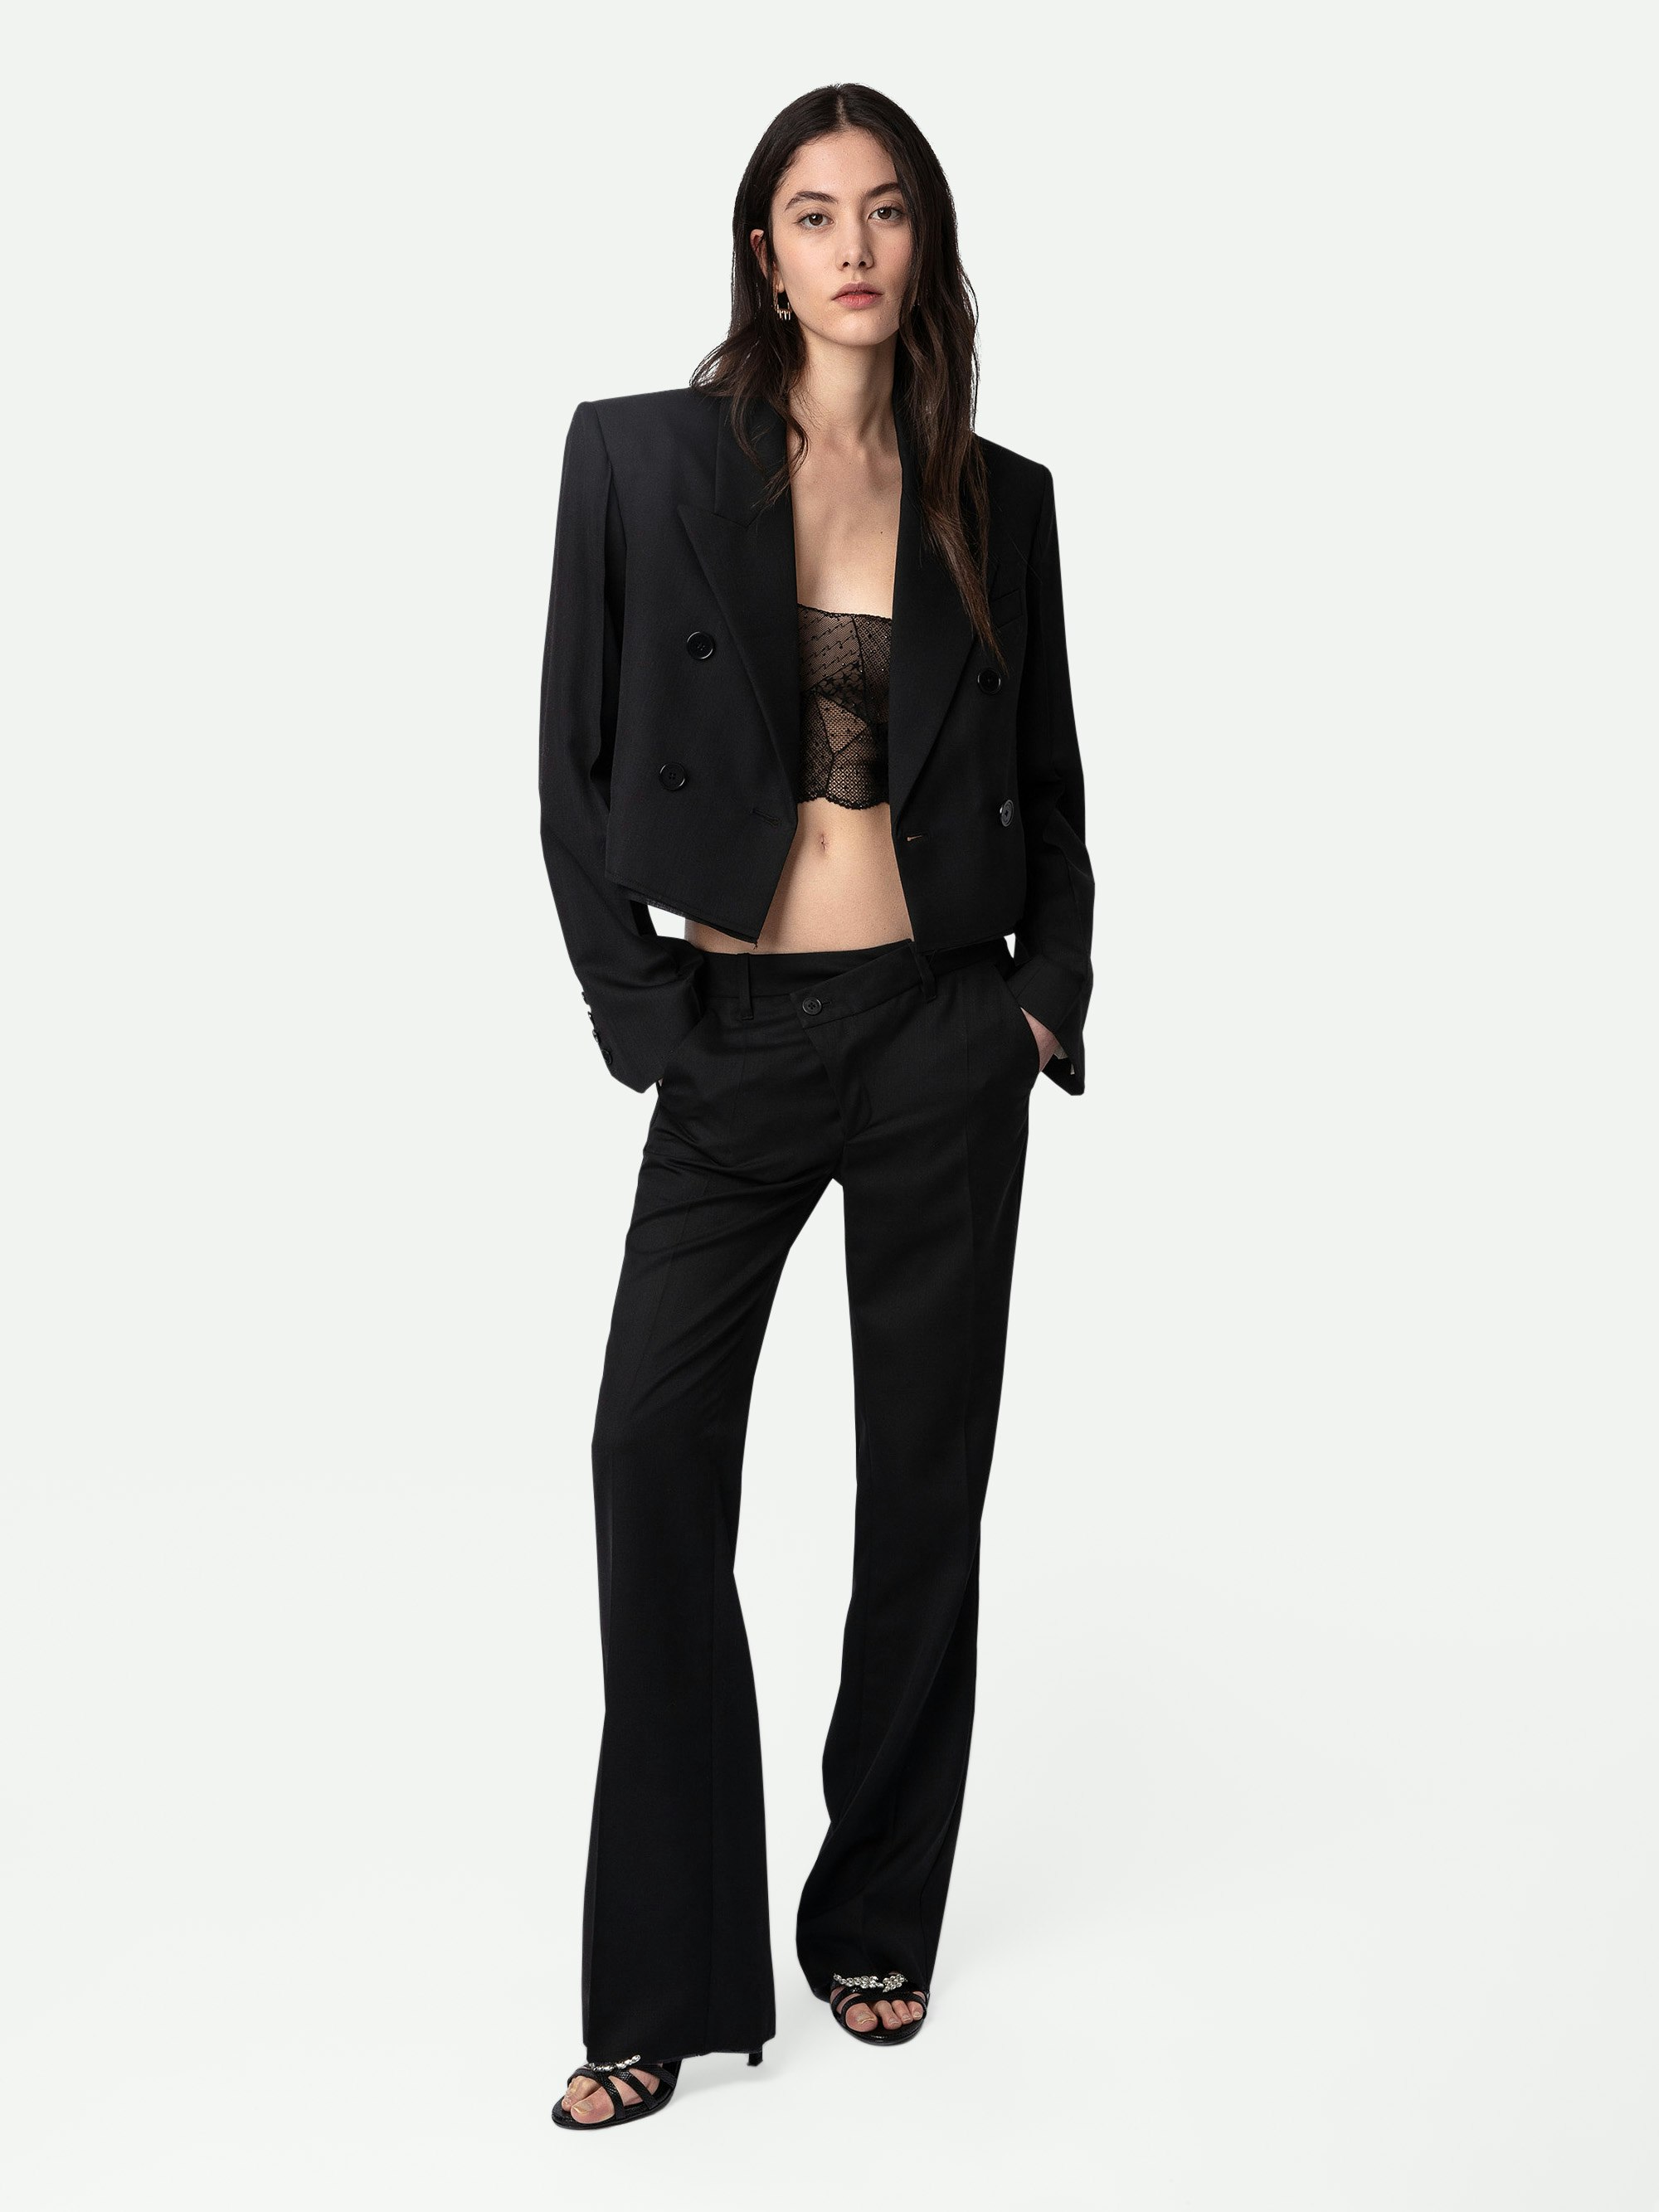 Poxy Trousers - Black cool wool loose-fitting tailored trousers with asymmetric fly and raw details.